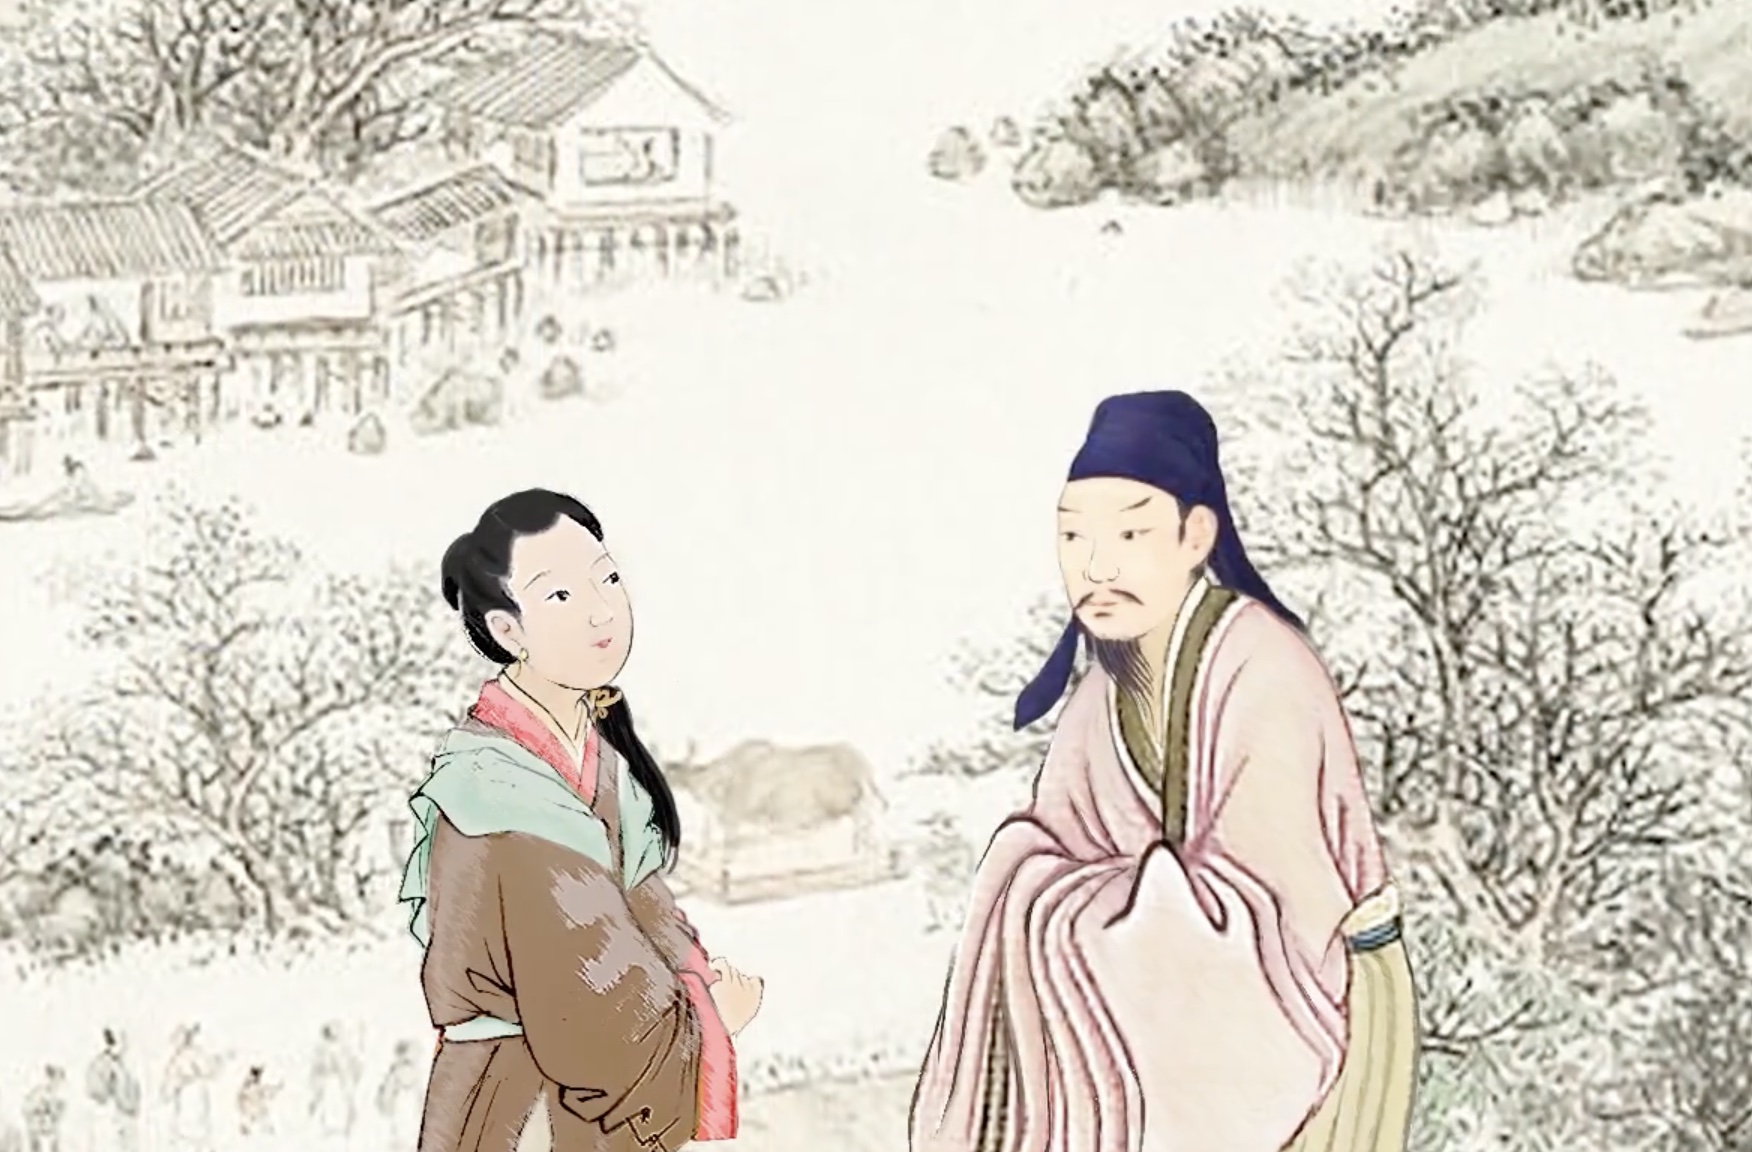 A Story of ‘Blind Love’ for Ancient China’s Valentine’s Day - Vision Times